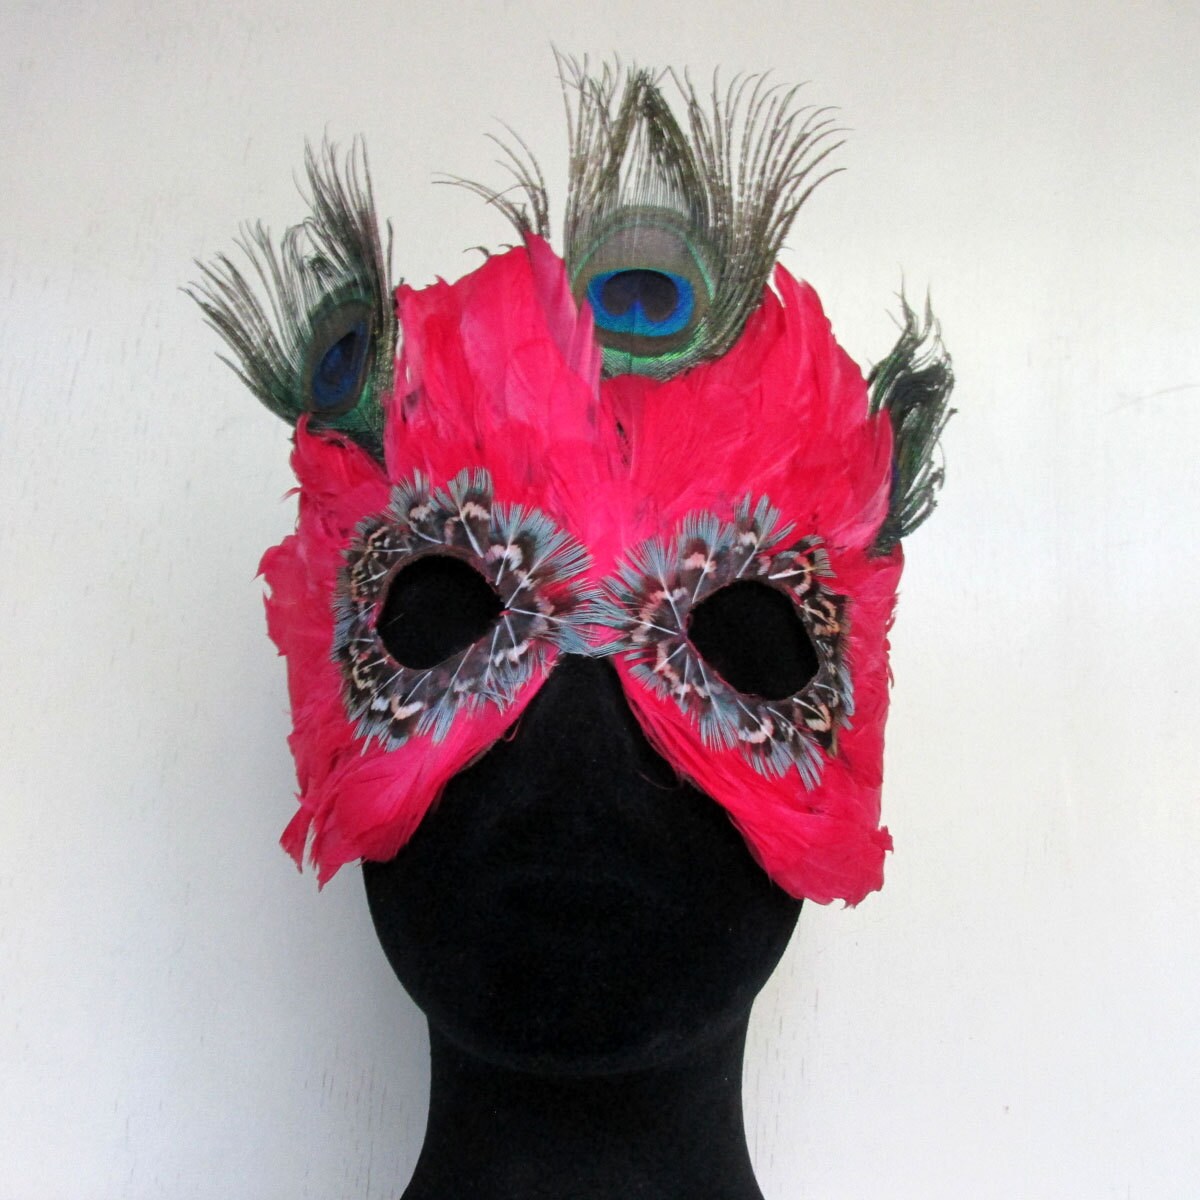 Fashionable Quality, Themed masquerade ball decorations - Aibaba.com